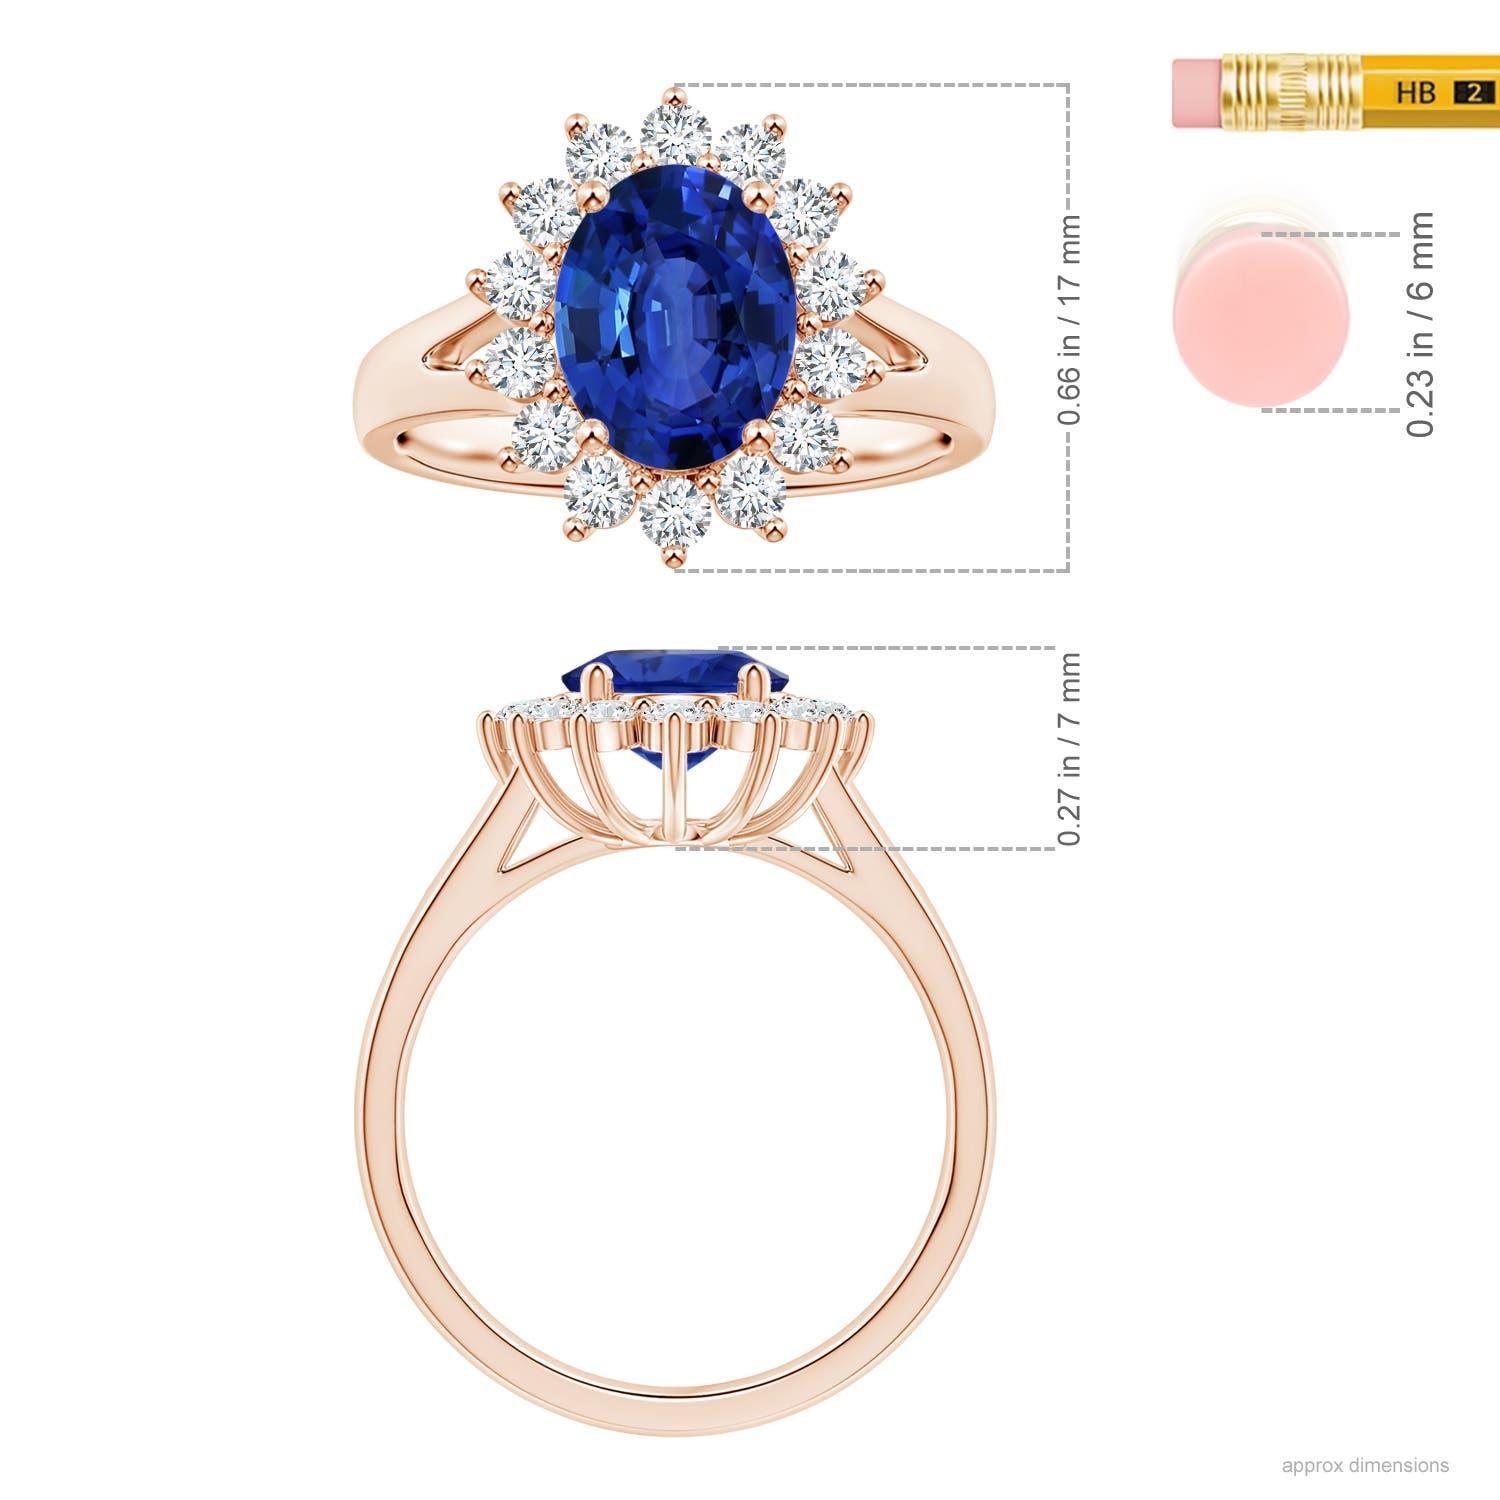 ANGARA Princess Diana Inspired GIA Certified Sapphire Rose Gold Ring with Halo 4